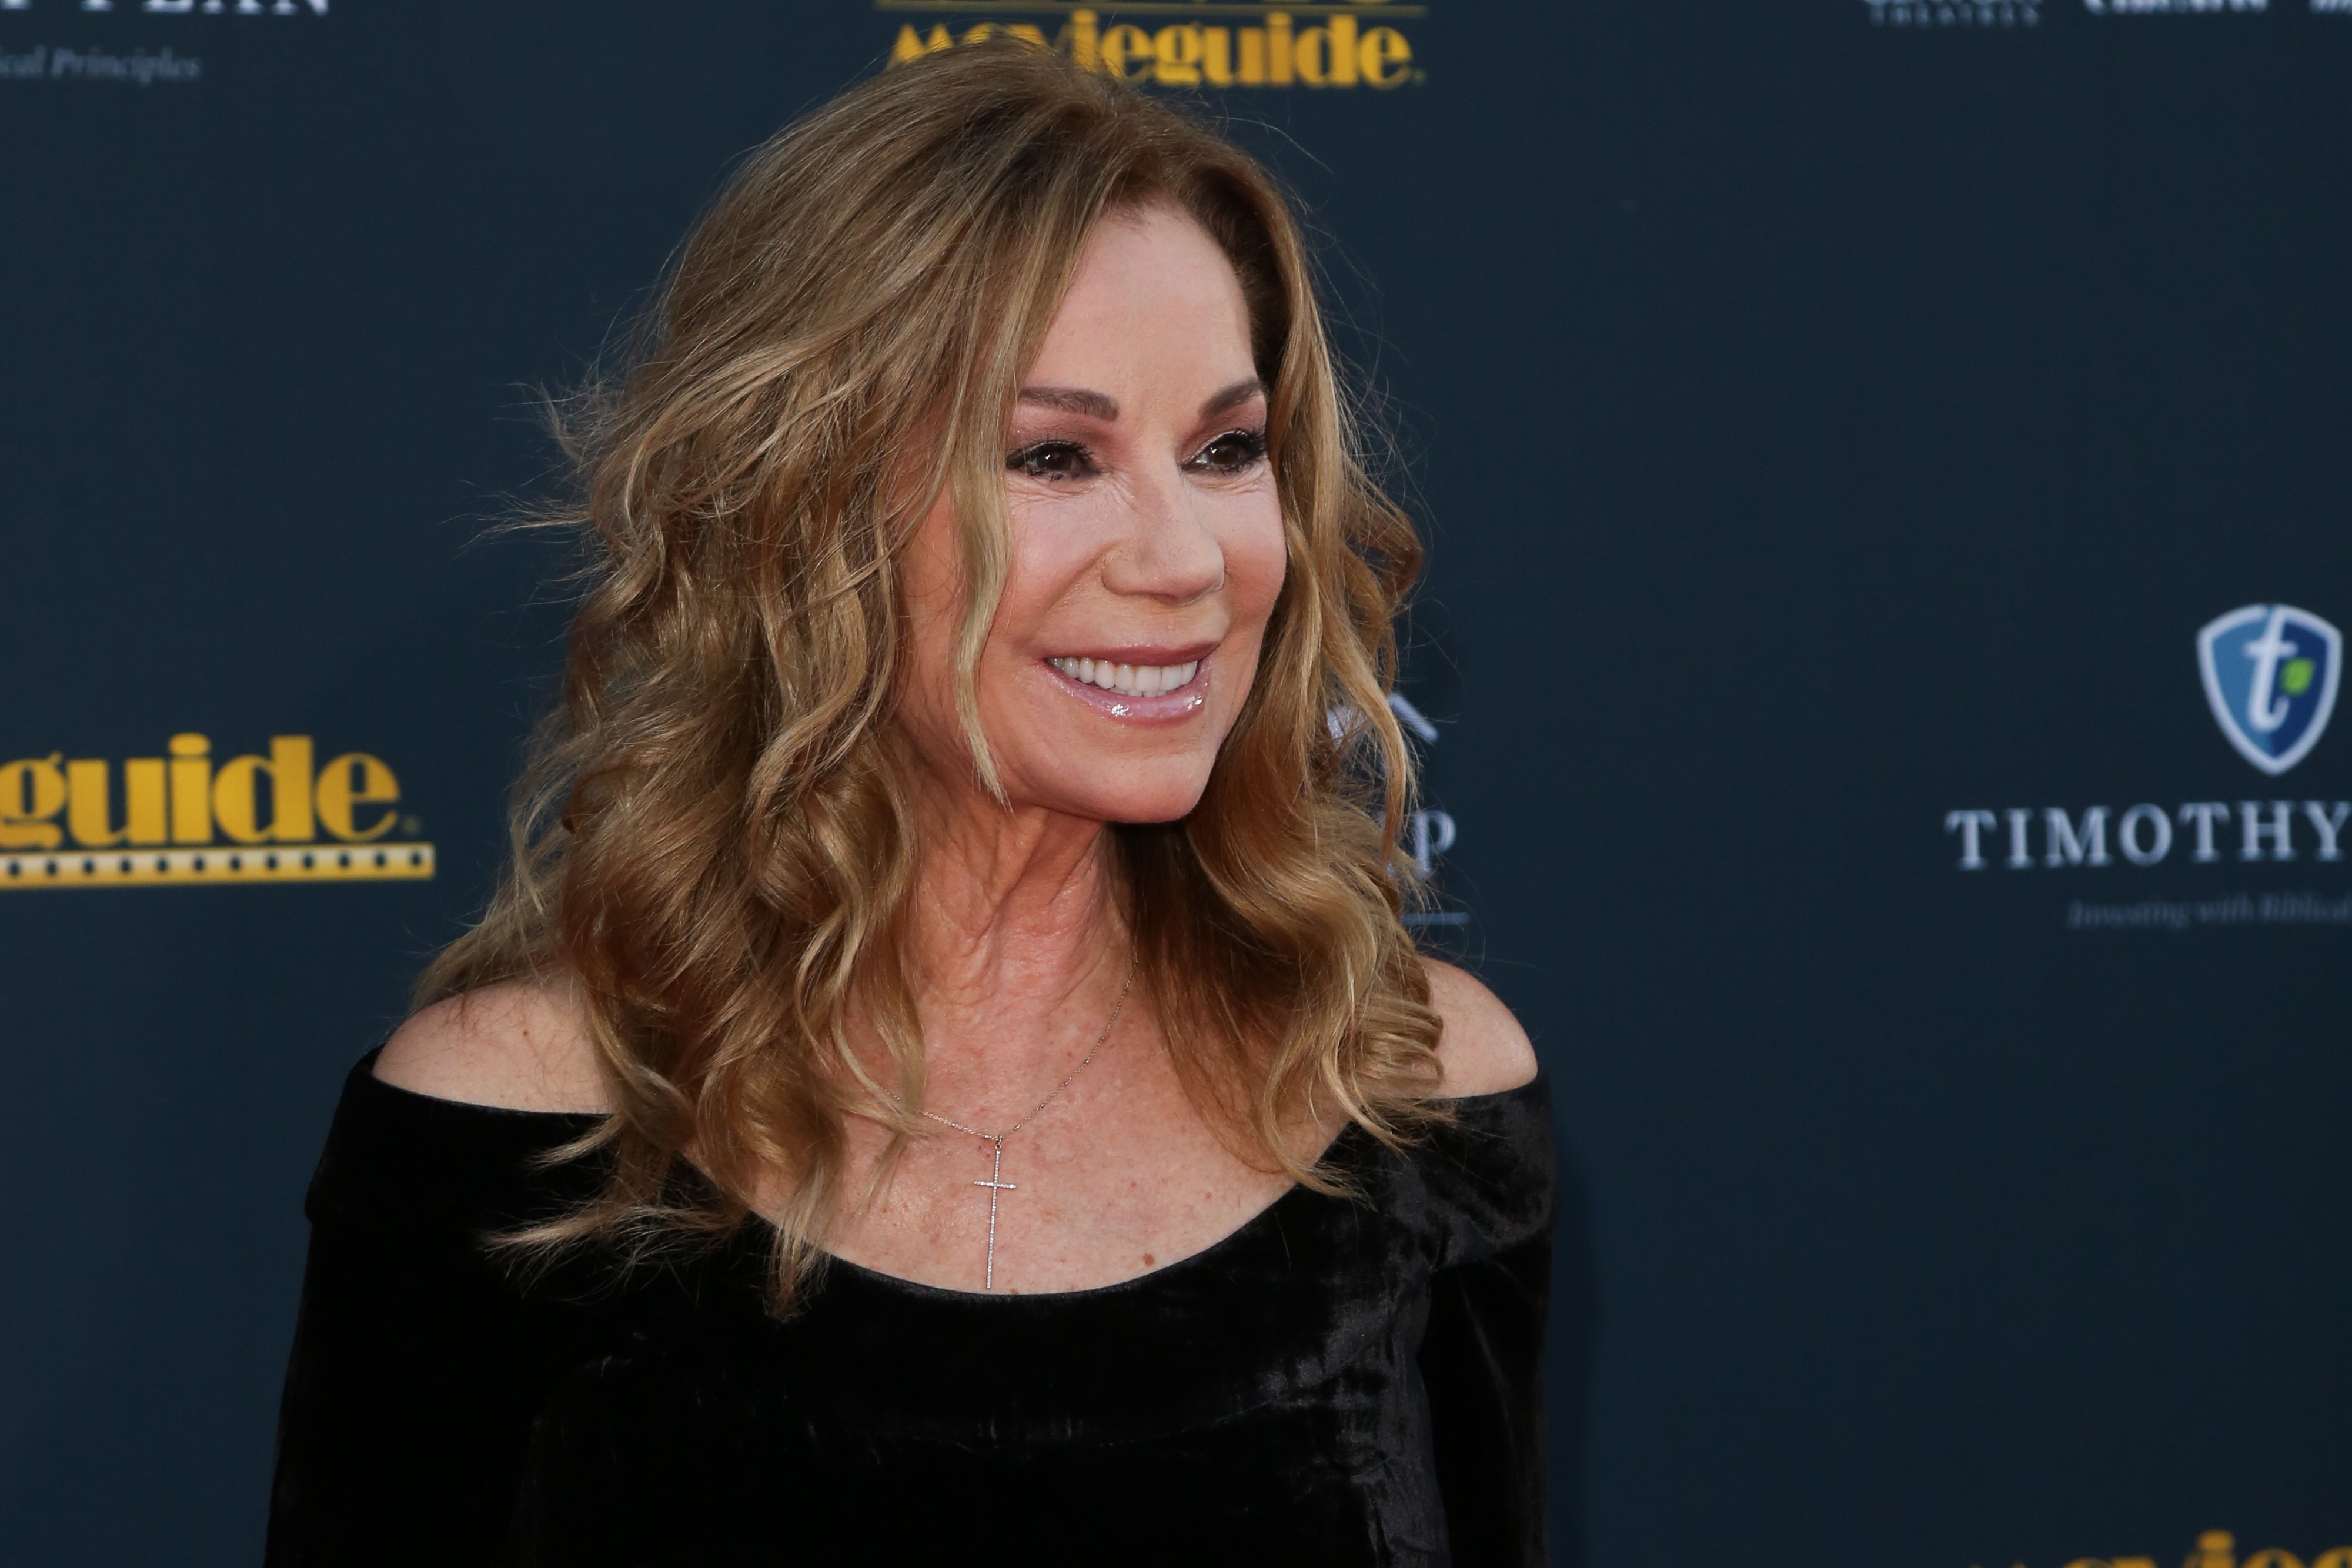 Kathie Lee Gifford attends the 28th Annual Movieguide Awards Gala on January 24, 2020, in Los Angeles, California. | Source: Getty Images.